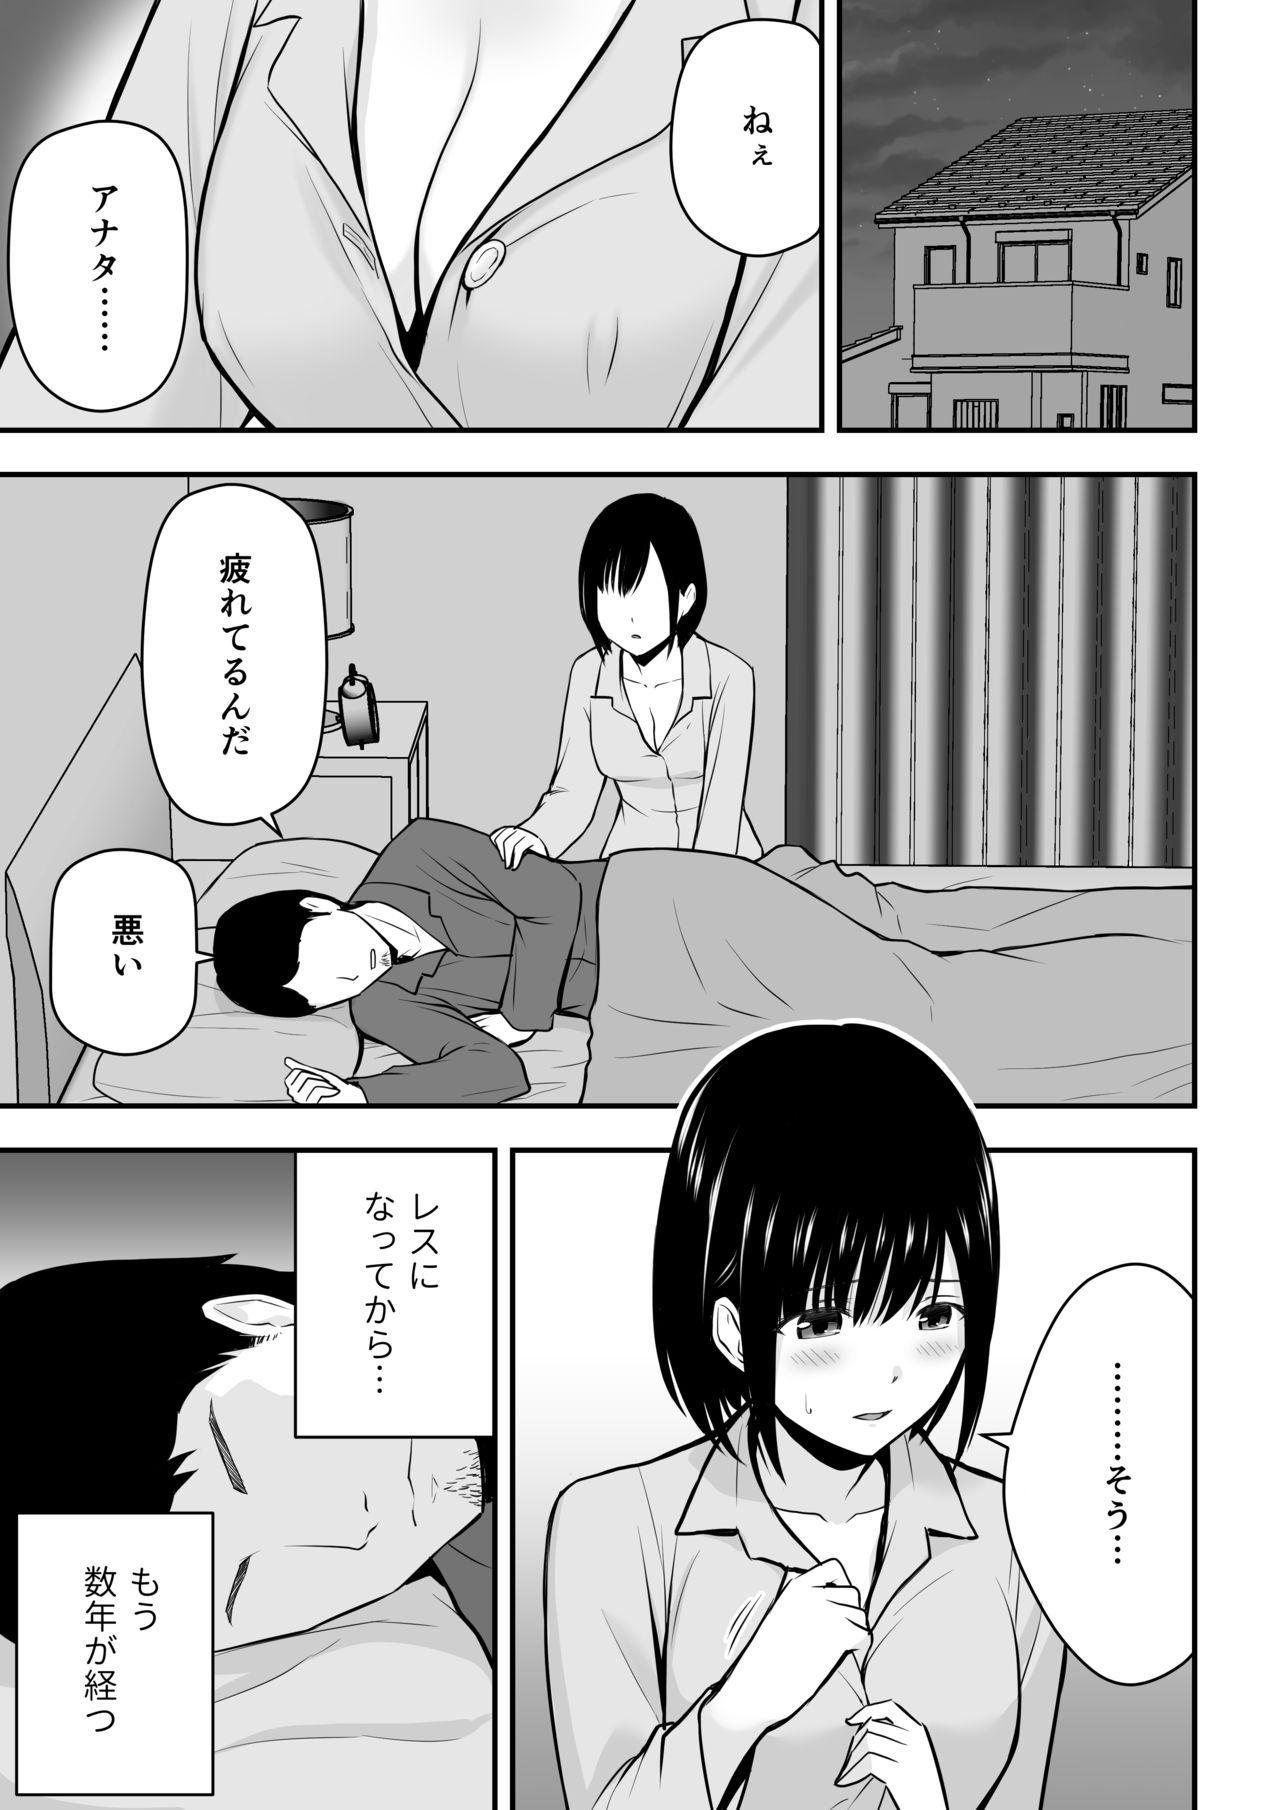 Doctor 愛する妻との寝取られ生活 - Original Atm - Page 2